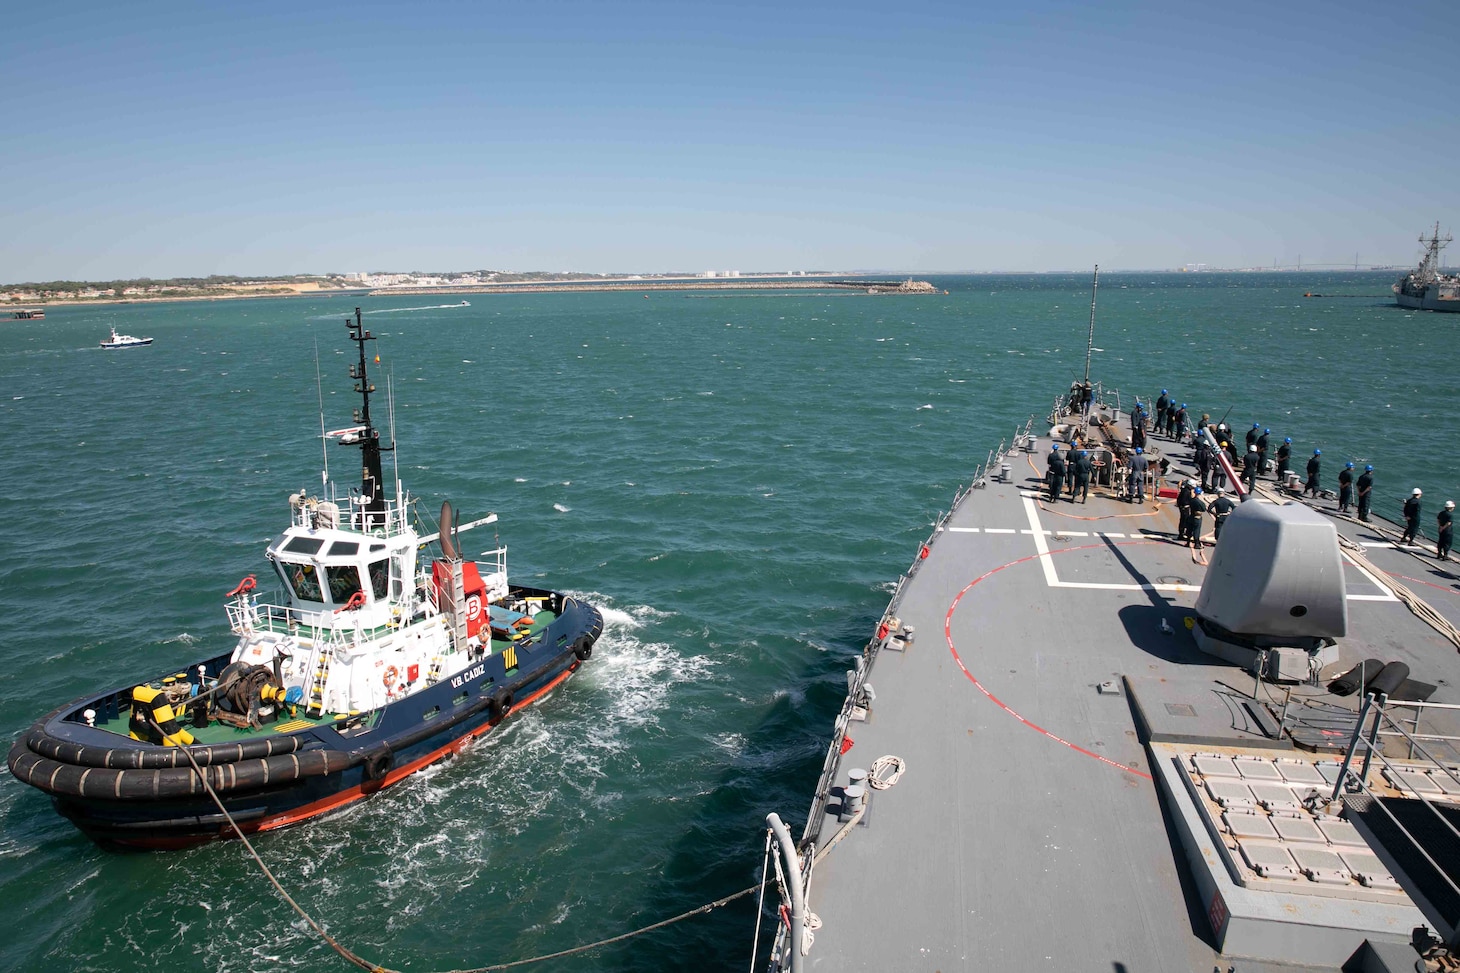 The Arleigh Burke-class guided-missile destroyer USS Porter (DDG 78) departs Naval Station Rota, Spain, May 10, 2022. Porter is on a scheduled deployment in the U.S. Sixth Fleet area of operations in support of U.S., Allied and partner interest in Europe and Africa.